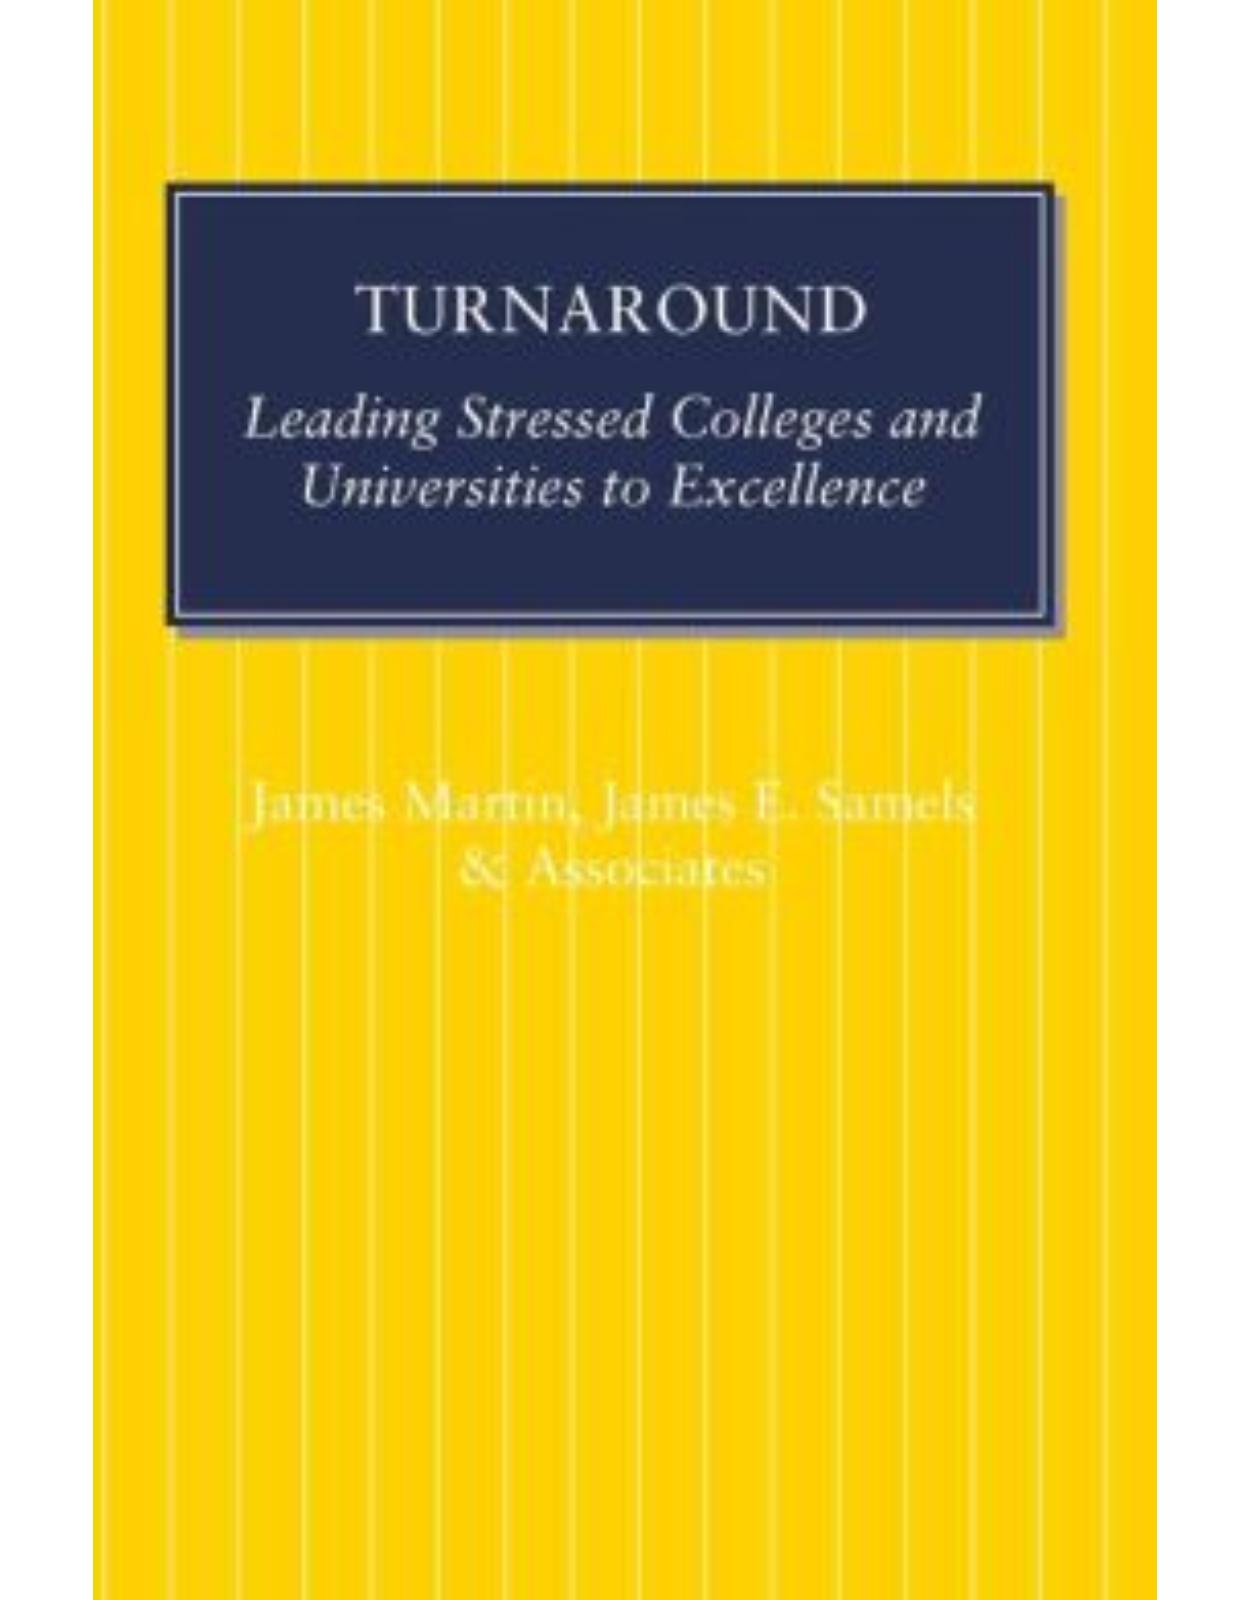 Turnaround. Leading Stressed Colleges and Universities to Excellence